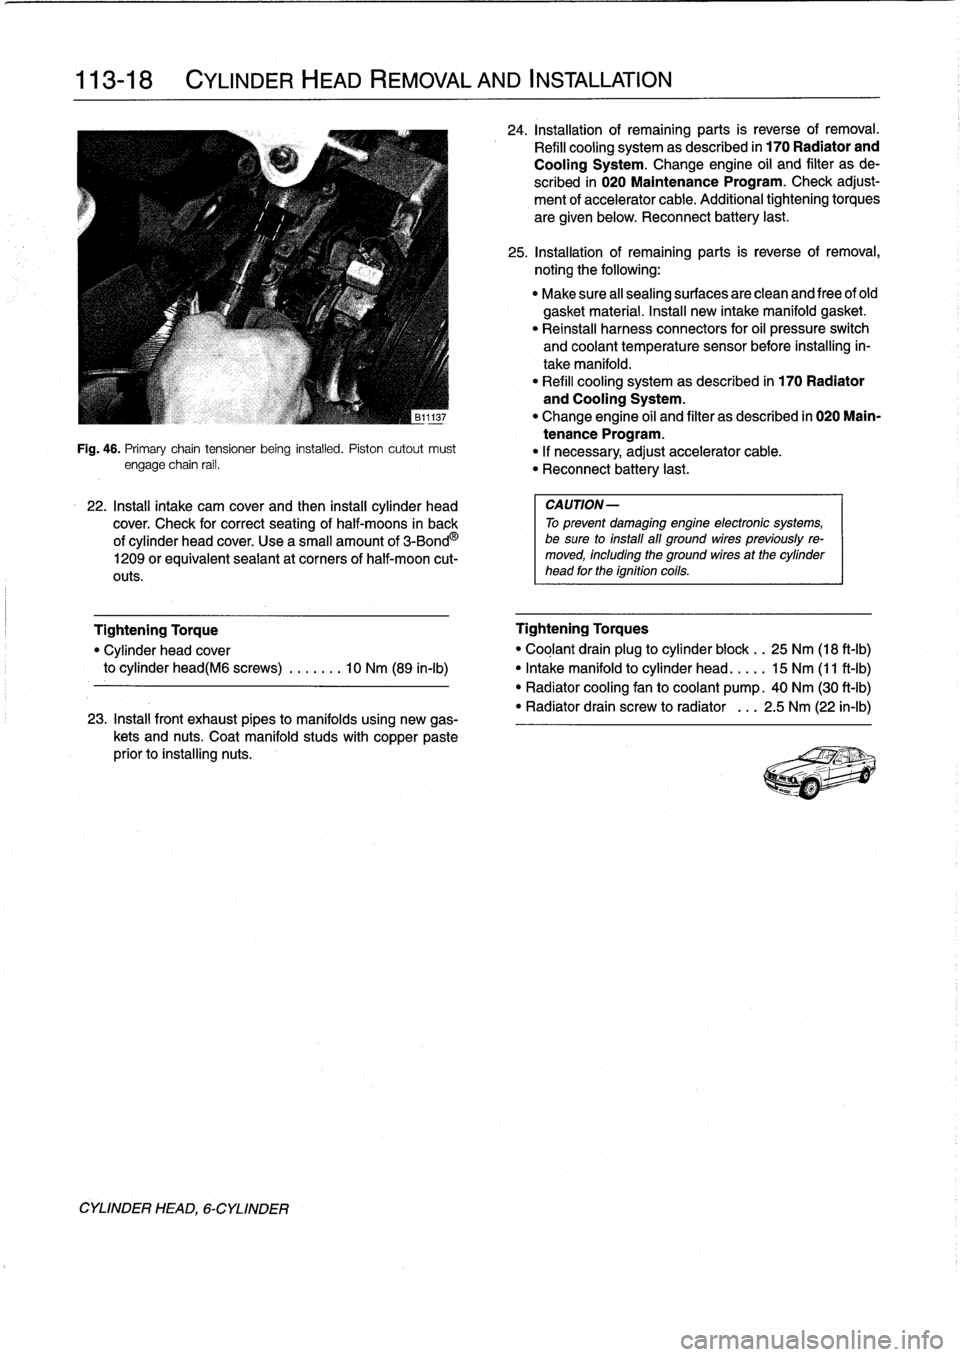 BMW 318i 1997 E36 User Guide 
113-
1
8

	

CYLINDER
HEAD
REMOVAL
AND
INSTALLATION

CYLINDER
HEAD,
6-CYLINDER

Fig
.
46
.
Primary
chaintensioner
being
installed
.
Piston
cutout
must
engage
chain
rail
.

22
.
Install
intake
cam
cov